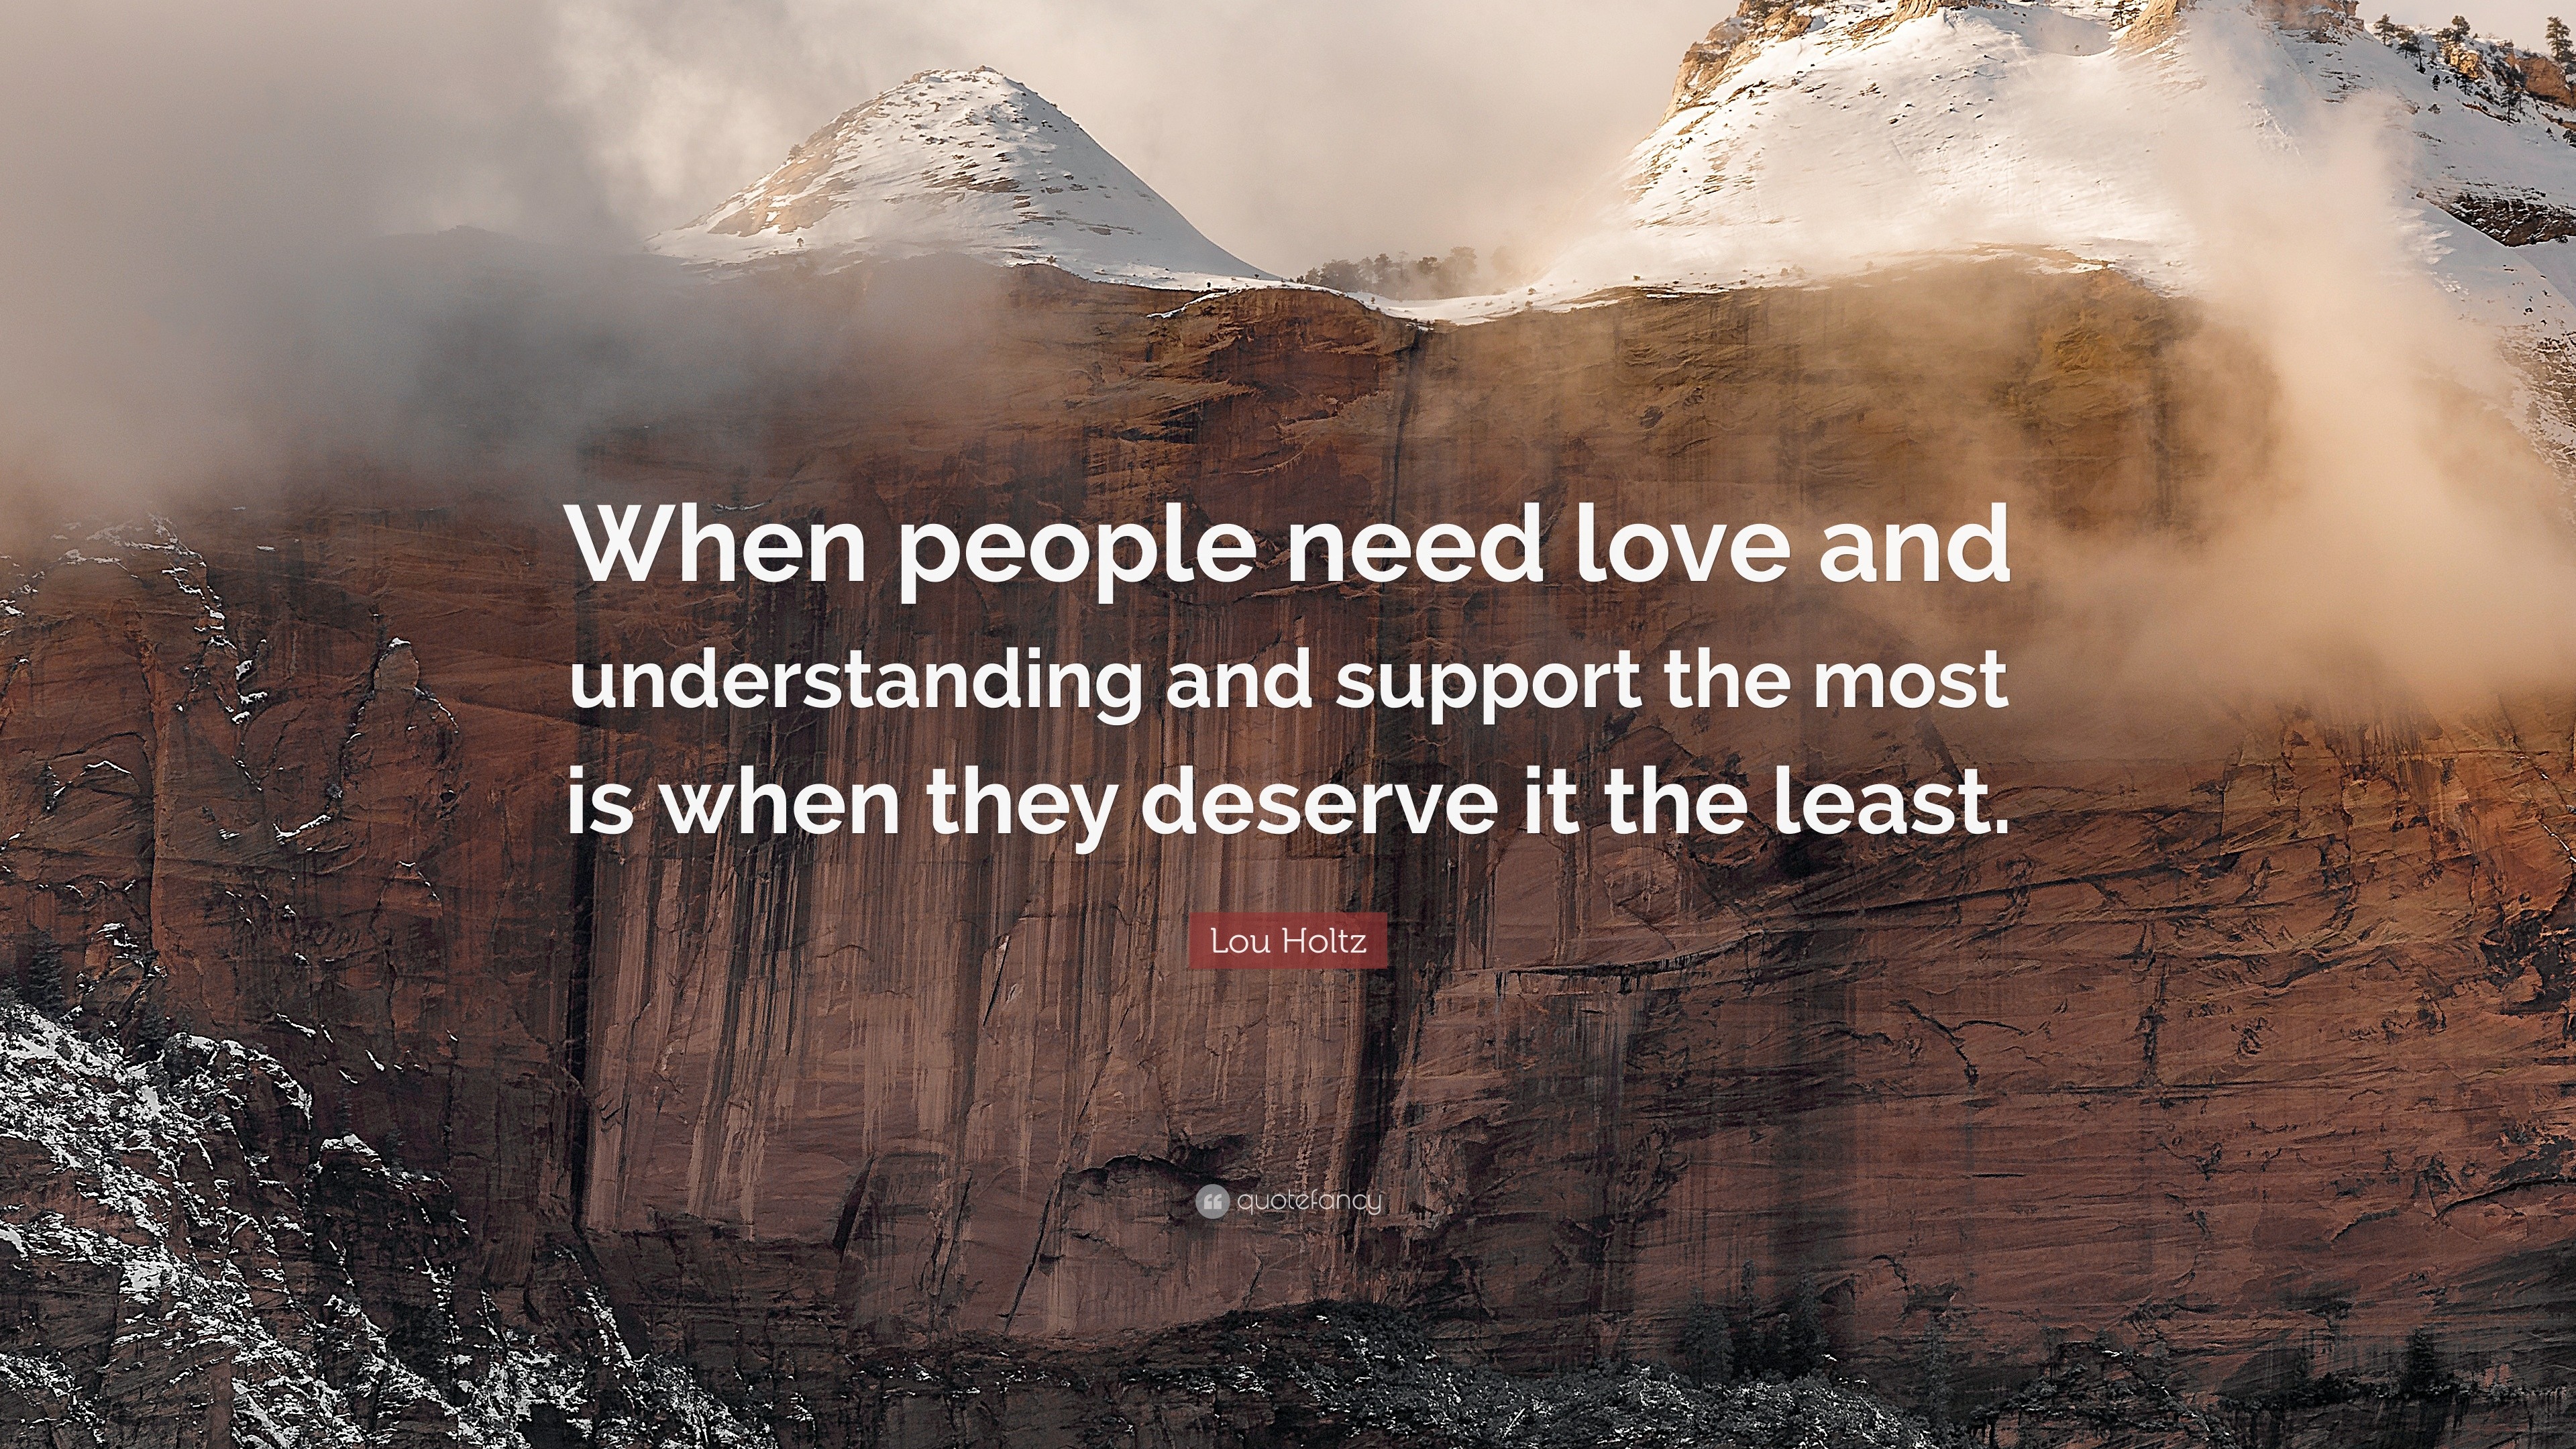 Lou Holtz Quote “When people need love and understanding and support the most is